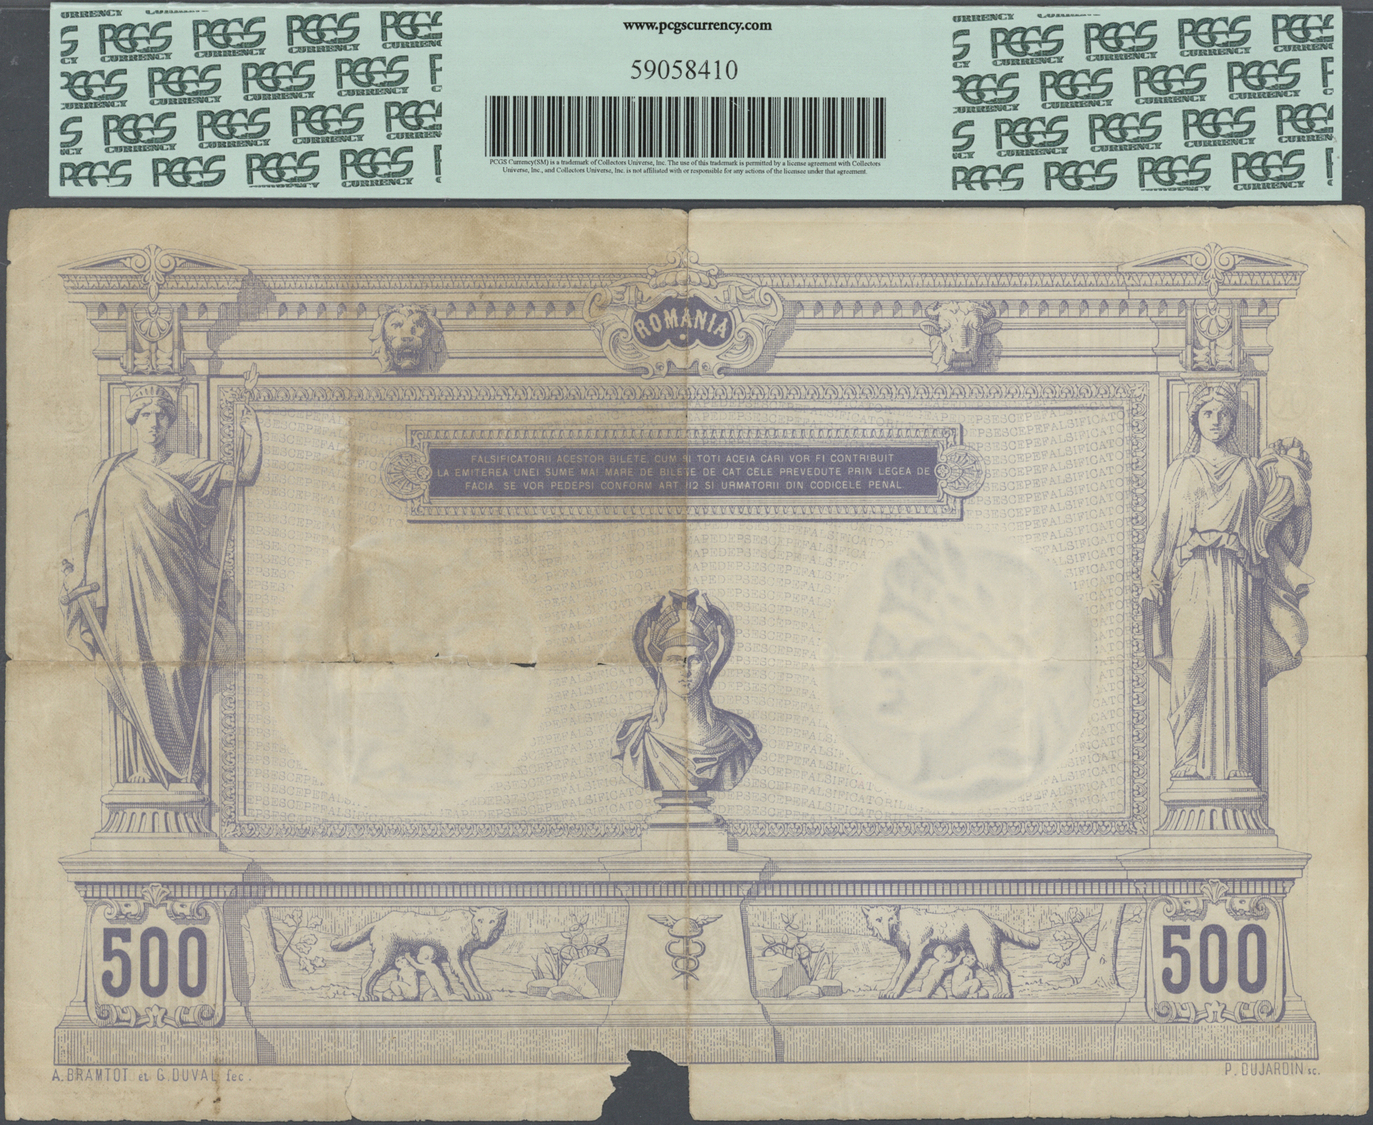 02039 Romania / Rumänien: Rare Banknote 500 Lei 1877 P. 6b, 3 Signatures, Bilet Hypothecar, Used With Folds And Creases, - Roumanie